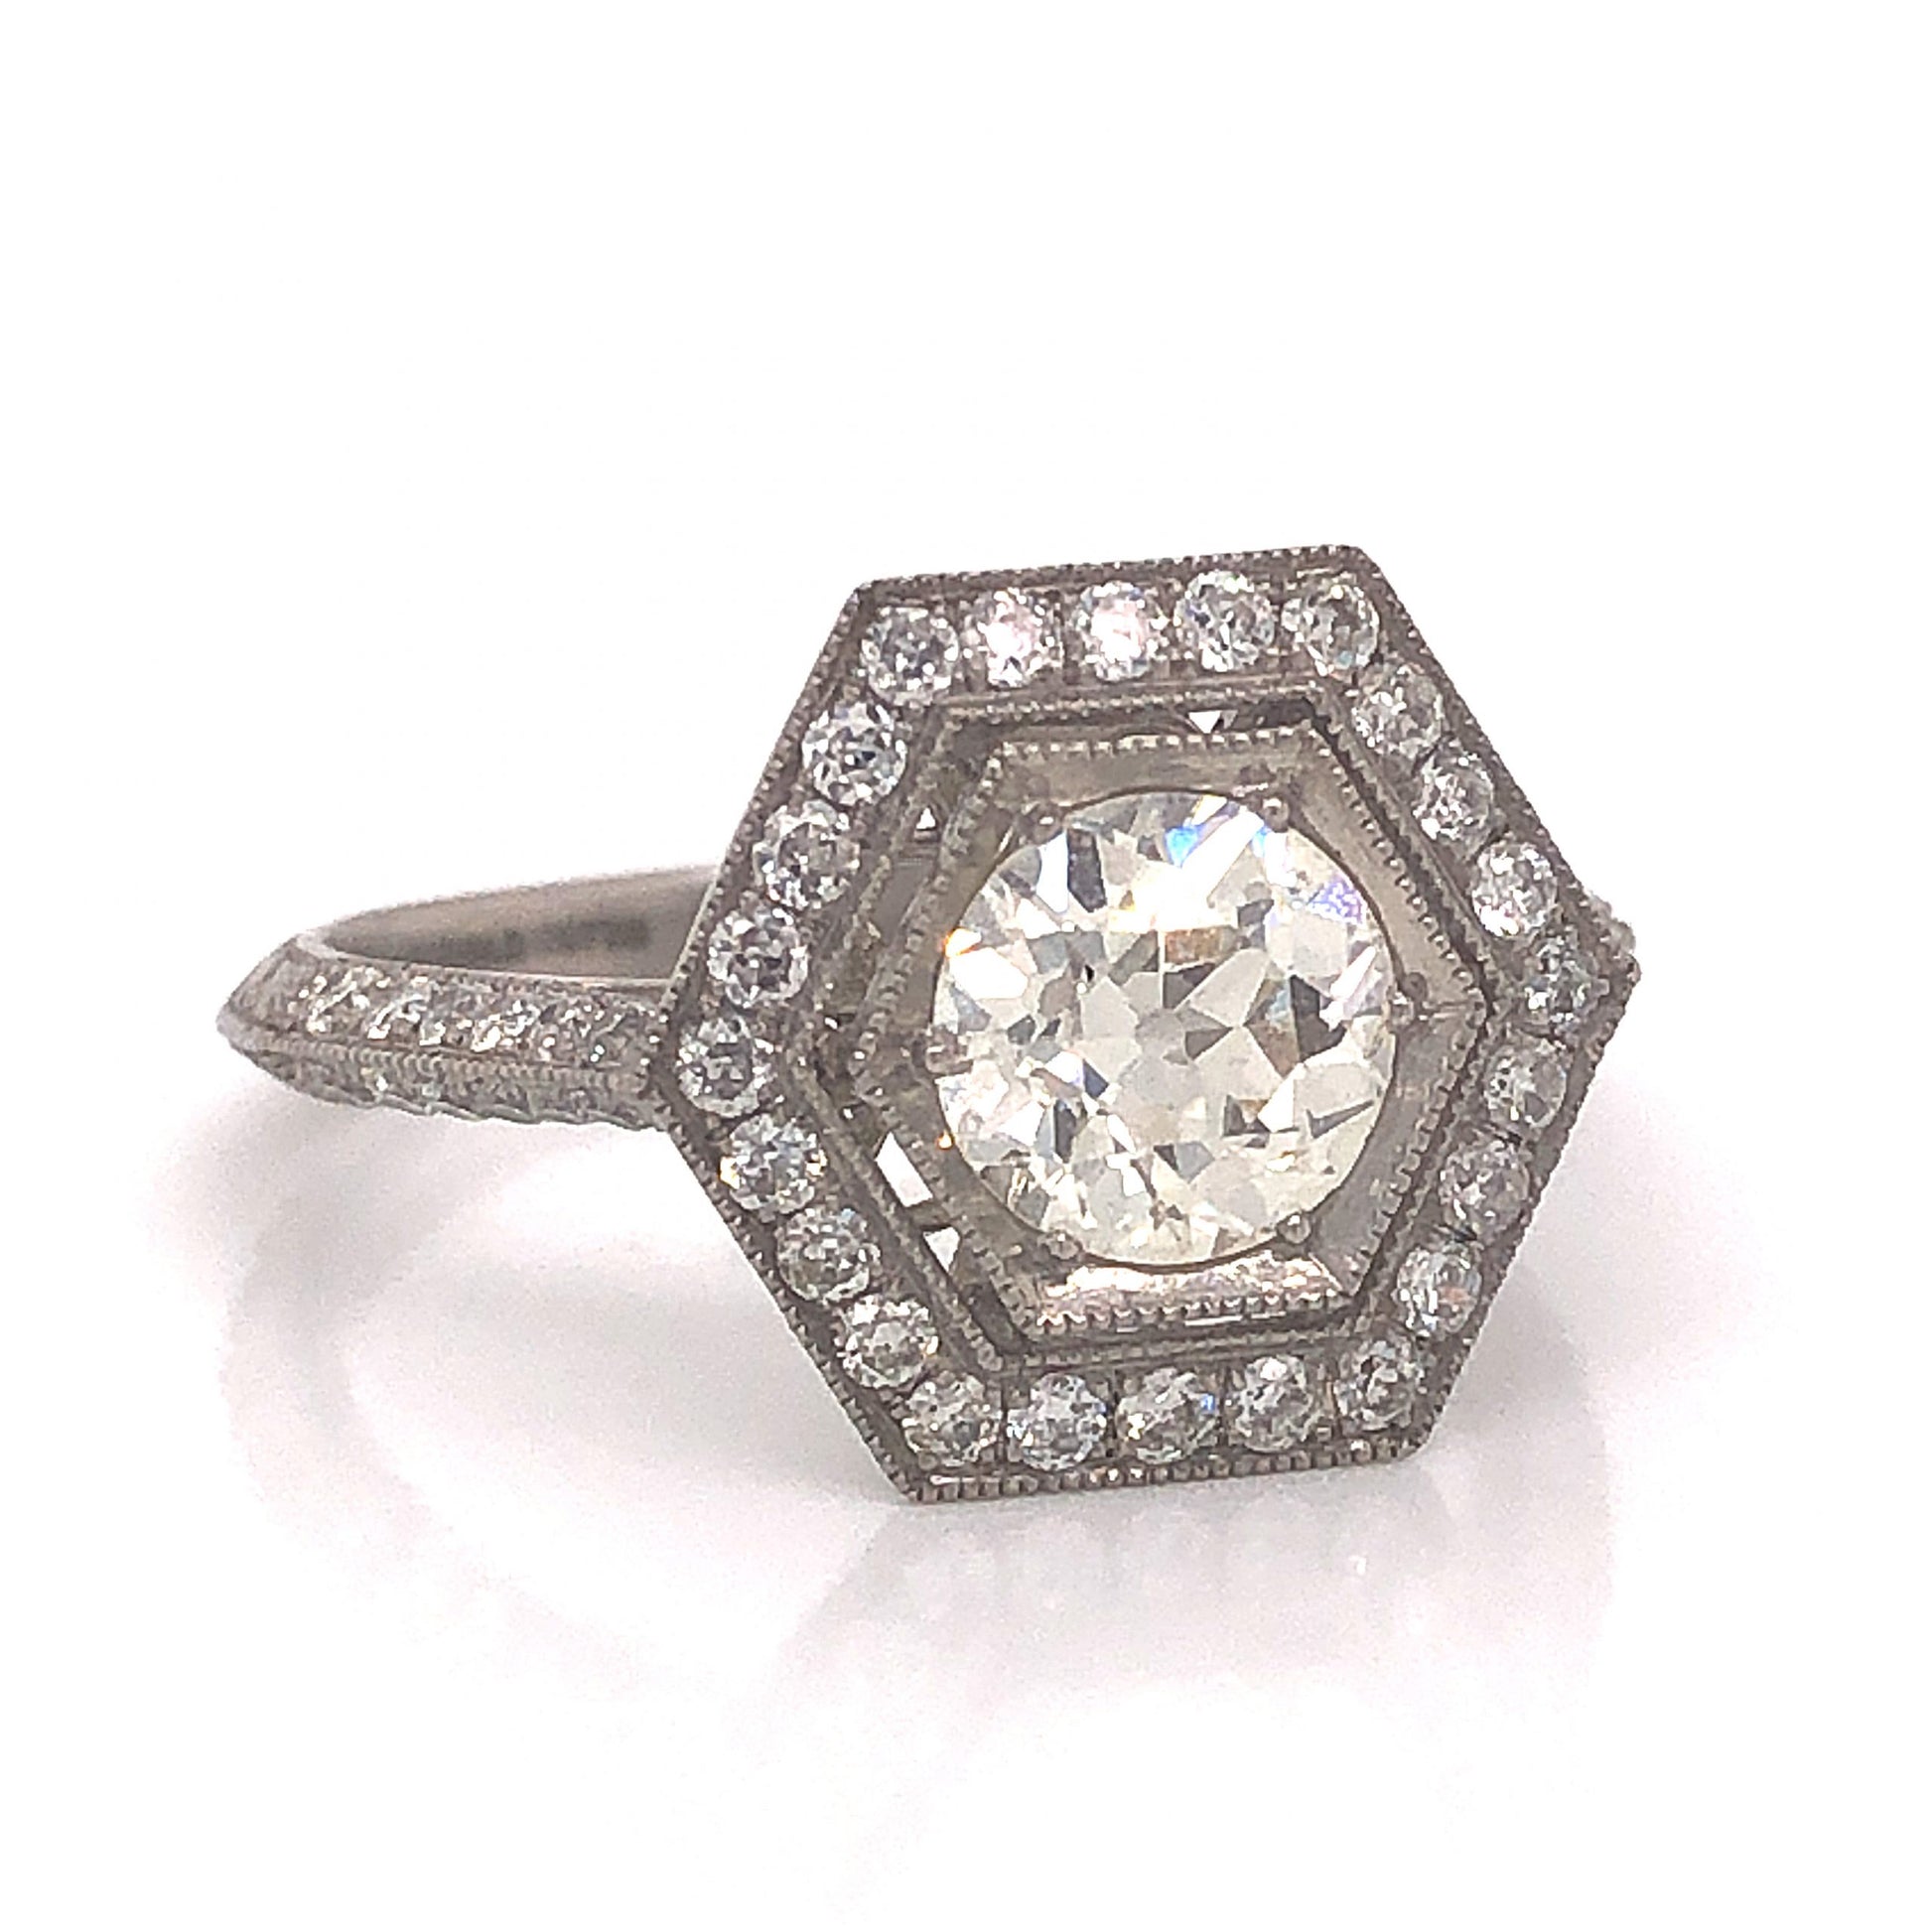 Hexagon Antique Inspired Diamond Engagement Ring in PlatinumComposition: Platinum Ring Size: 6.5 Total Diamond Weight: 1.44ct Total Gram Weight: 4.1 g Inscription: Plat Sophia D.
      